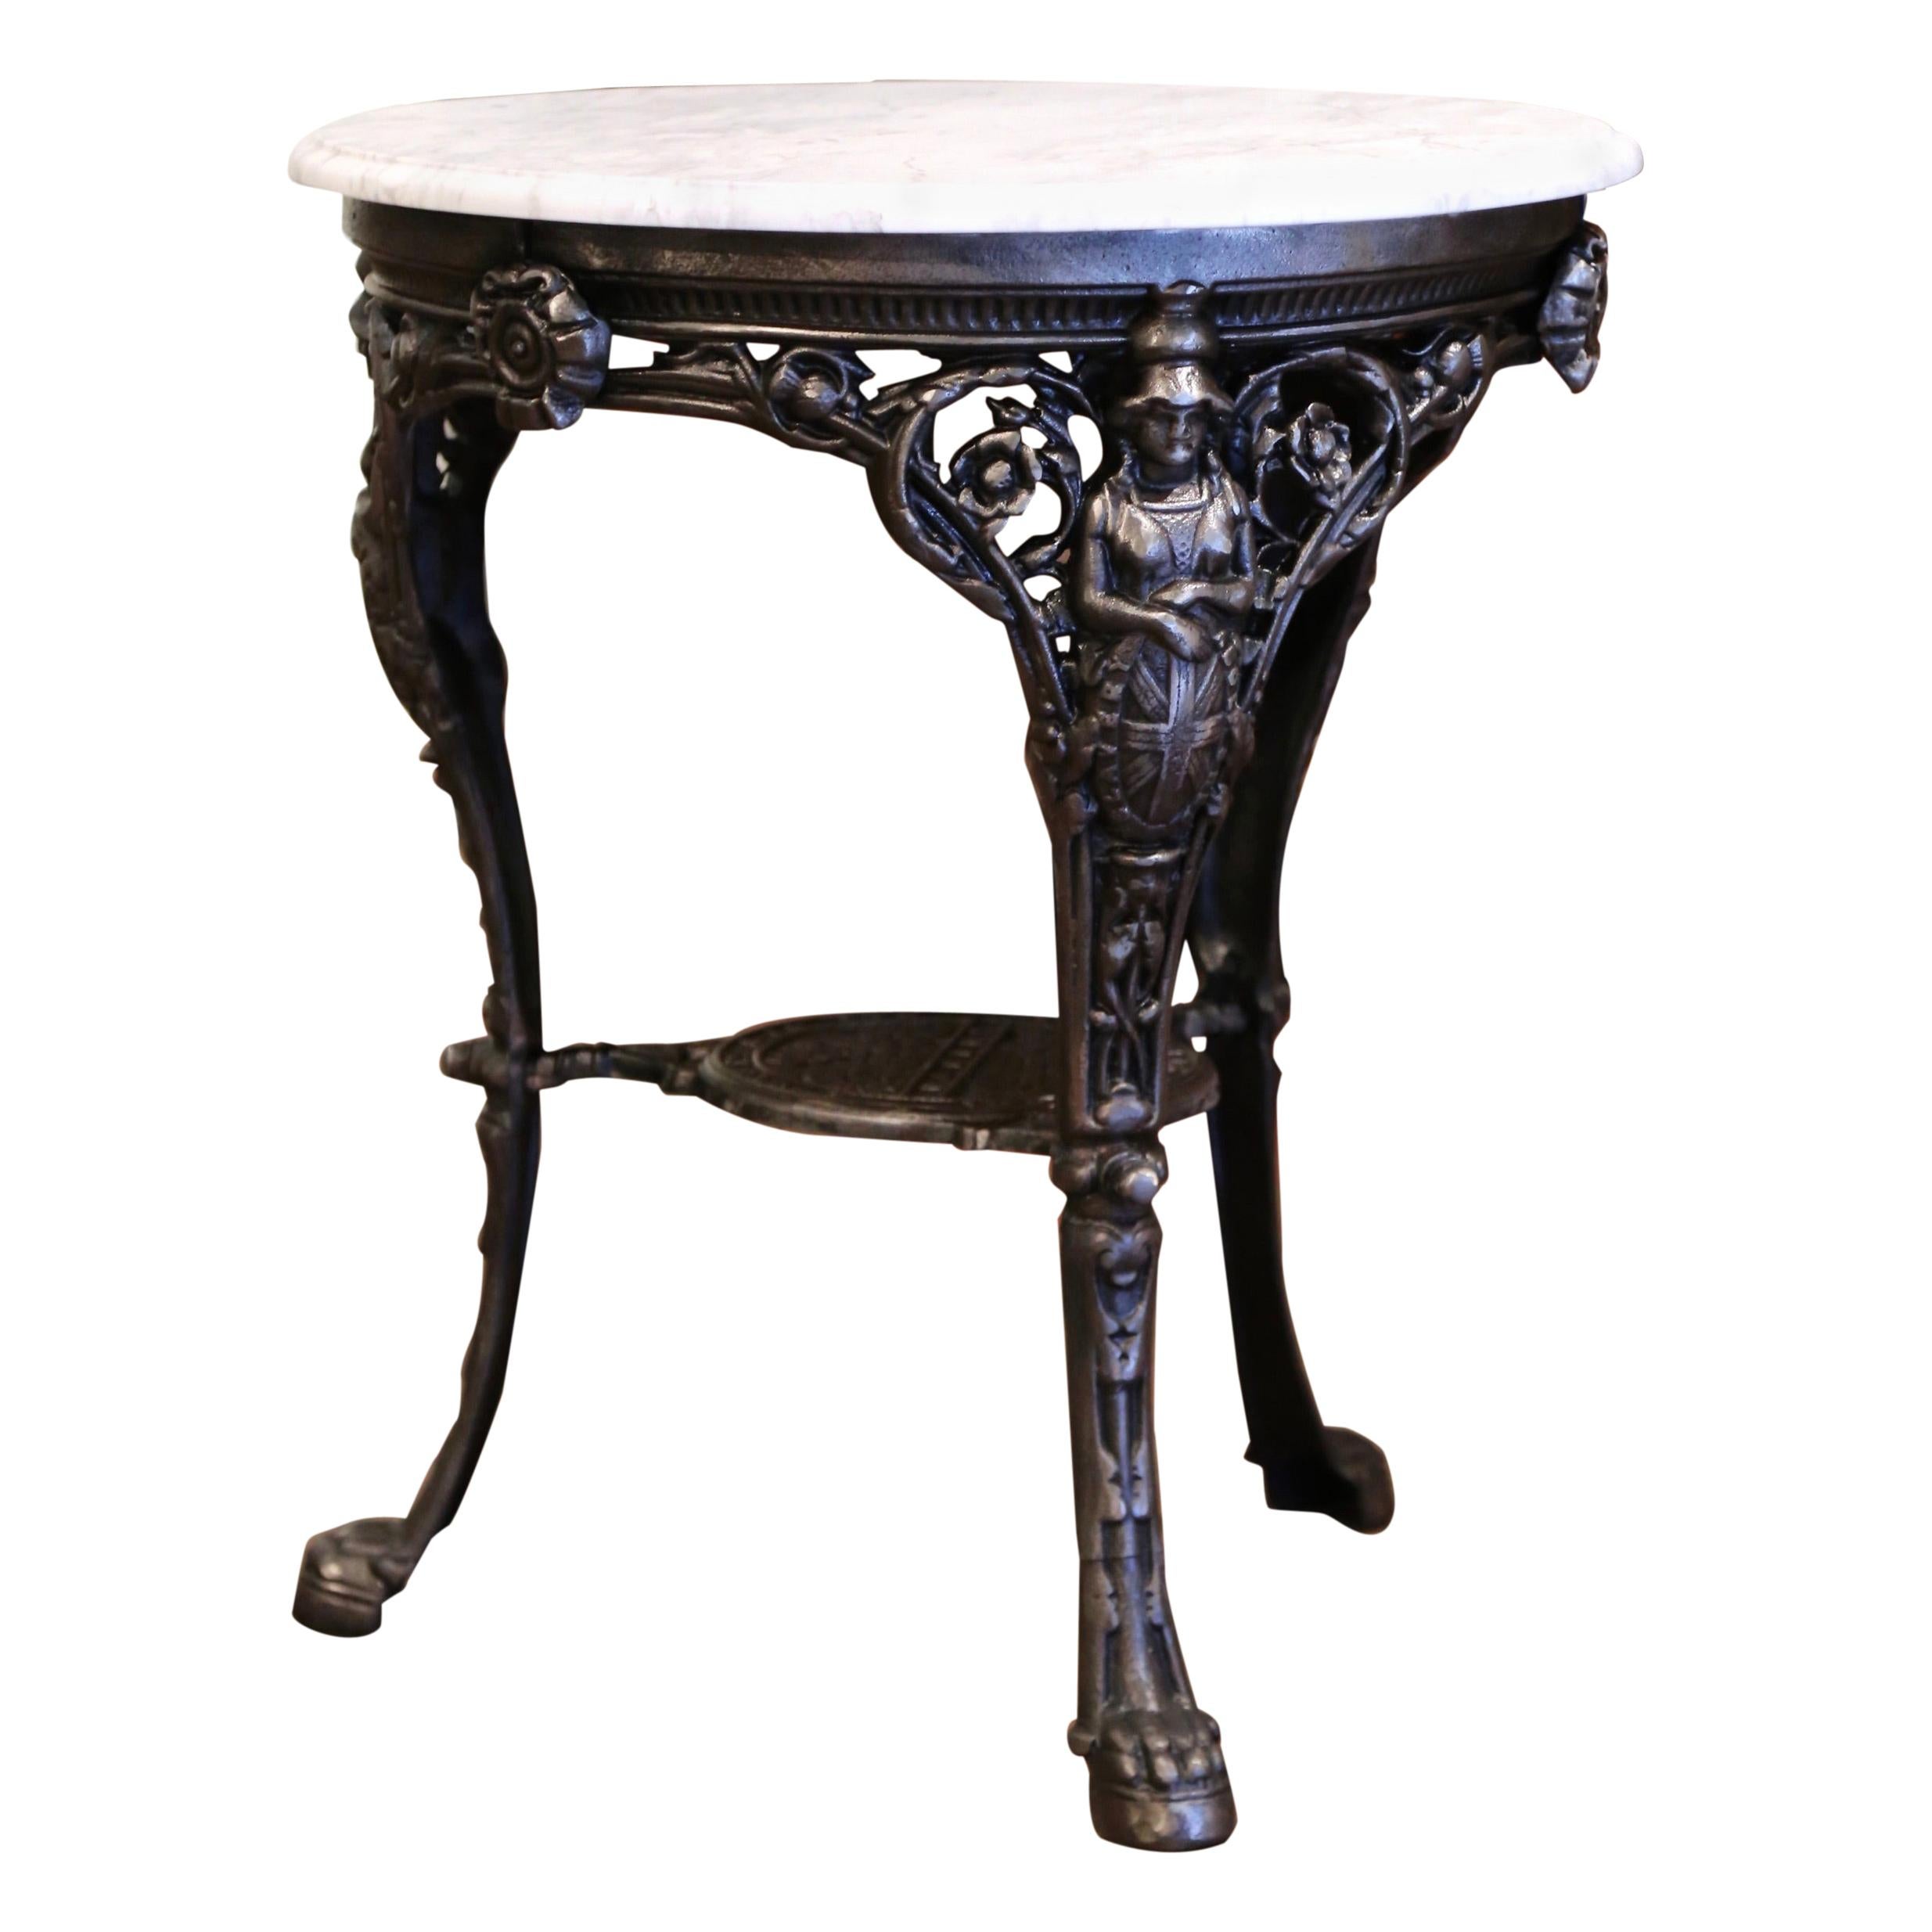 19th Century English Outdoor Polished Iron Pub Gueridon Table with Marble Top